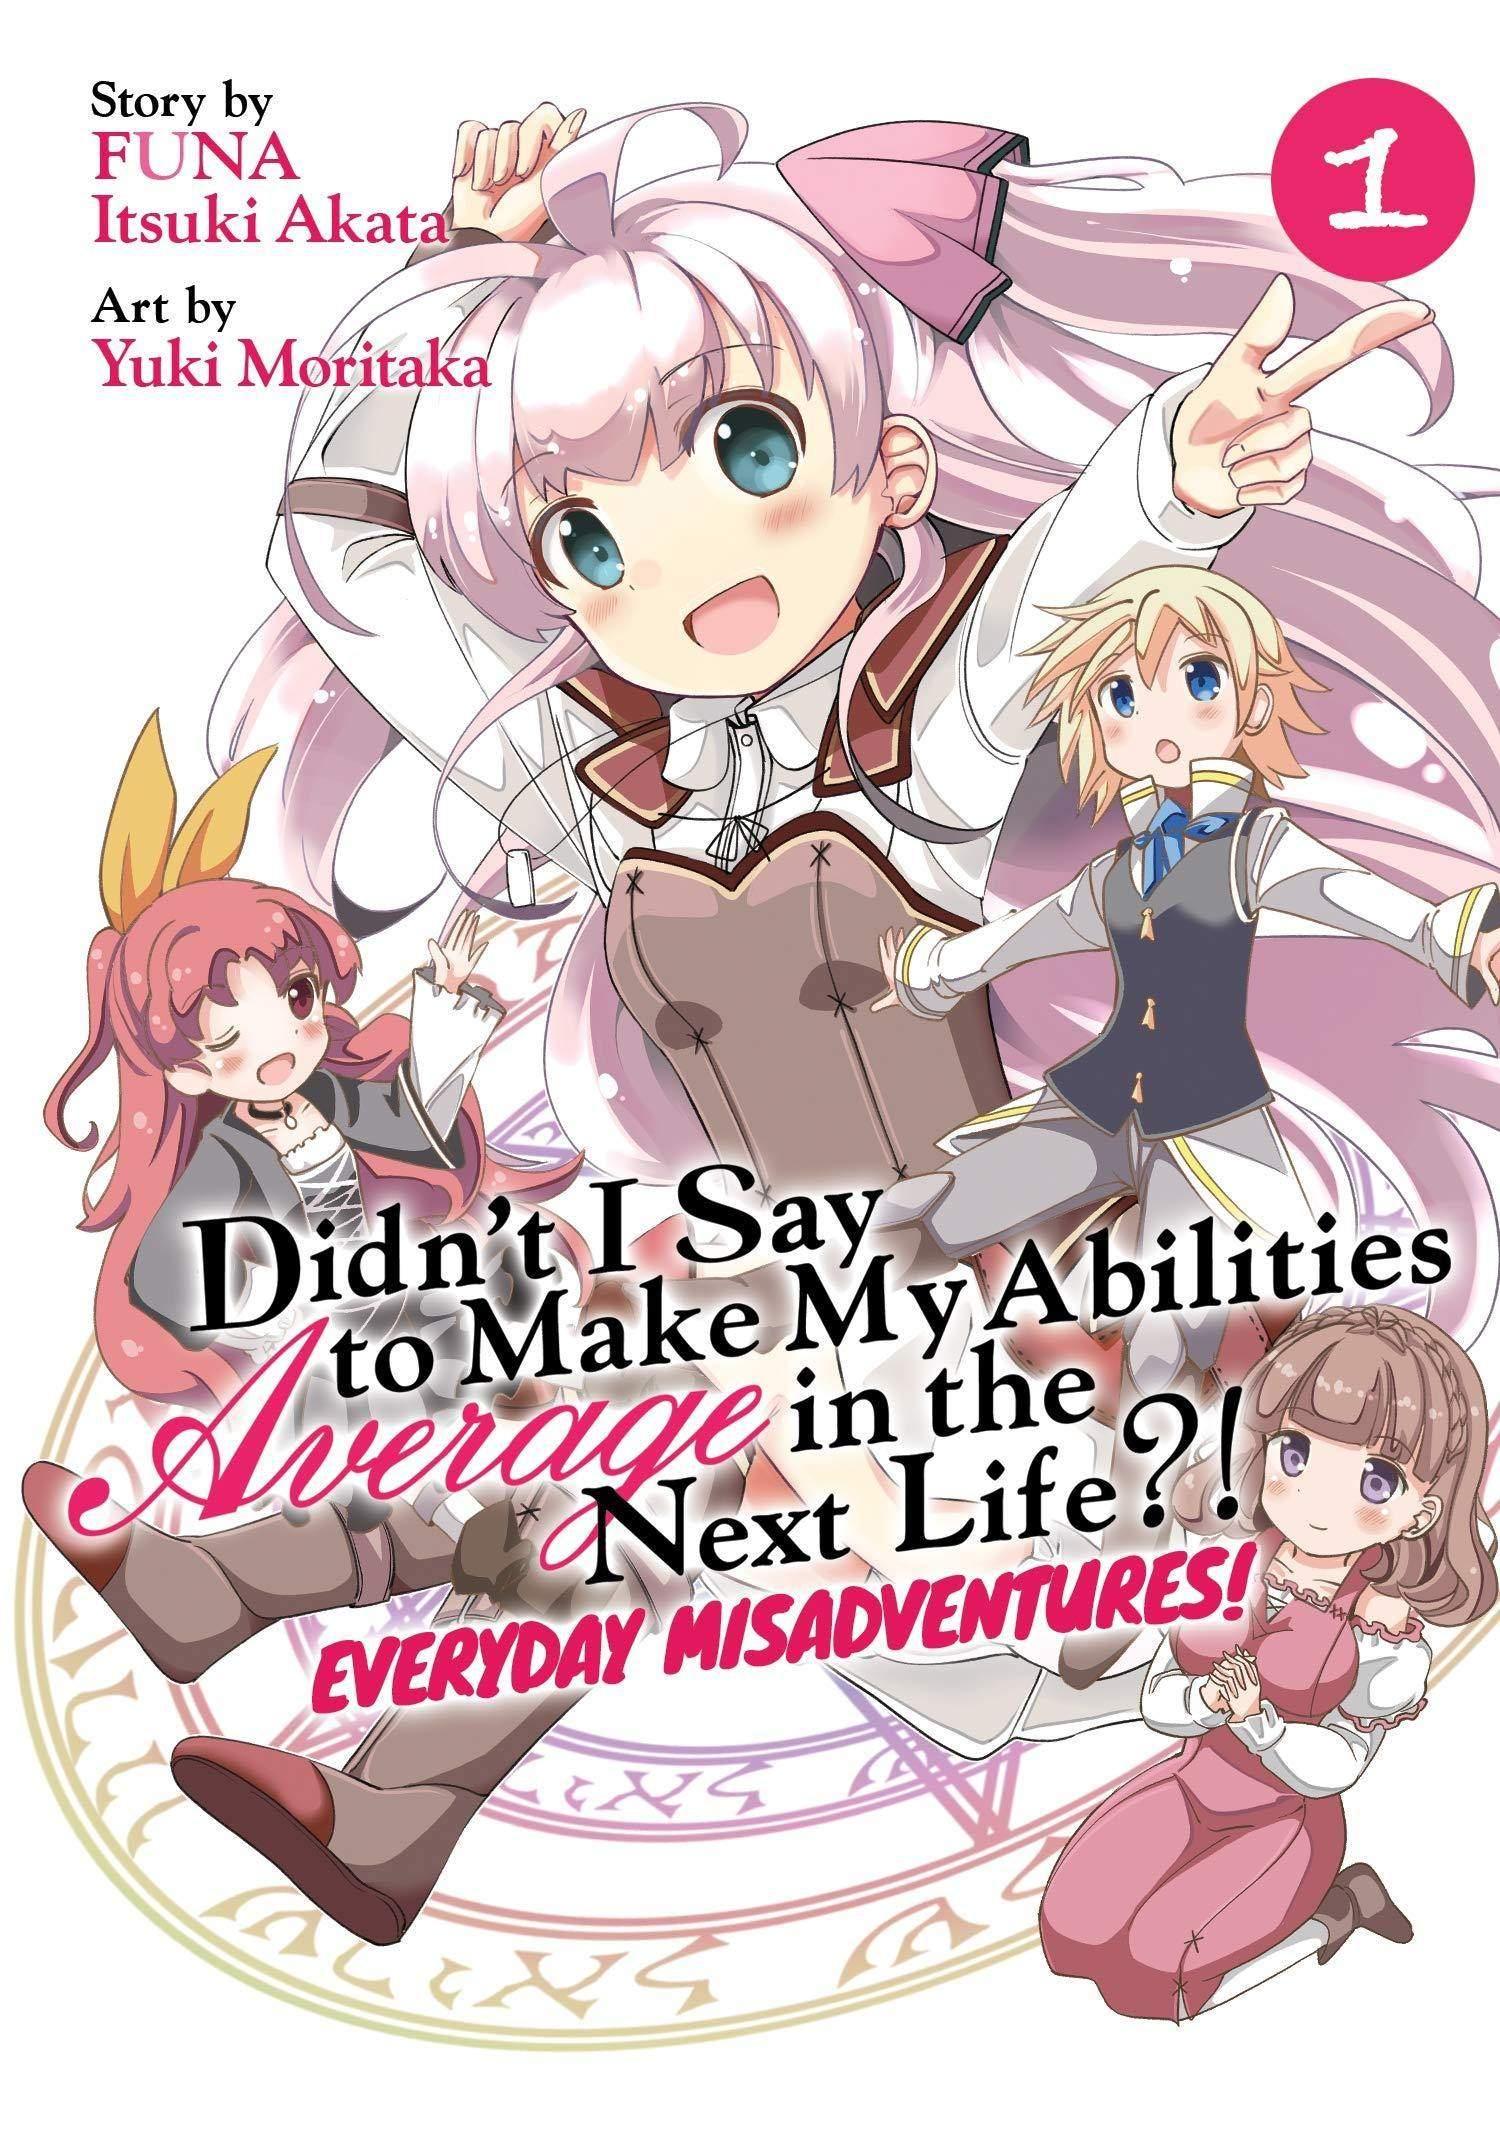 Didn't I Say to Make My Abilities Average in the Next Life?! Everyday Misadventures! (Manga) Vol. 1 - Tankobonbon